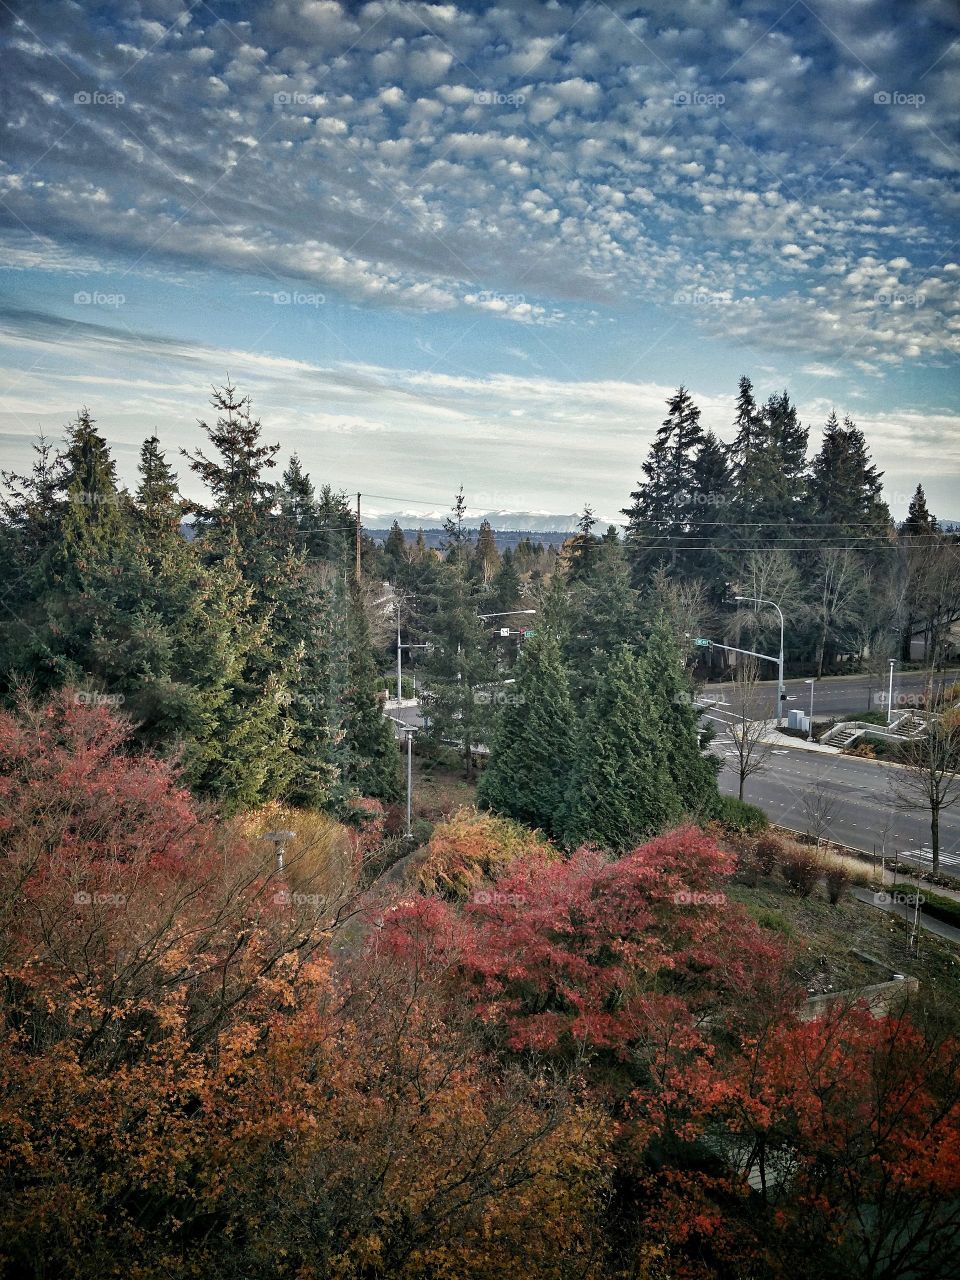 Fall in the Northwest